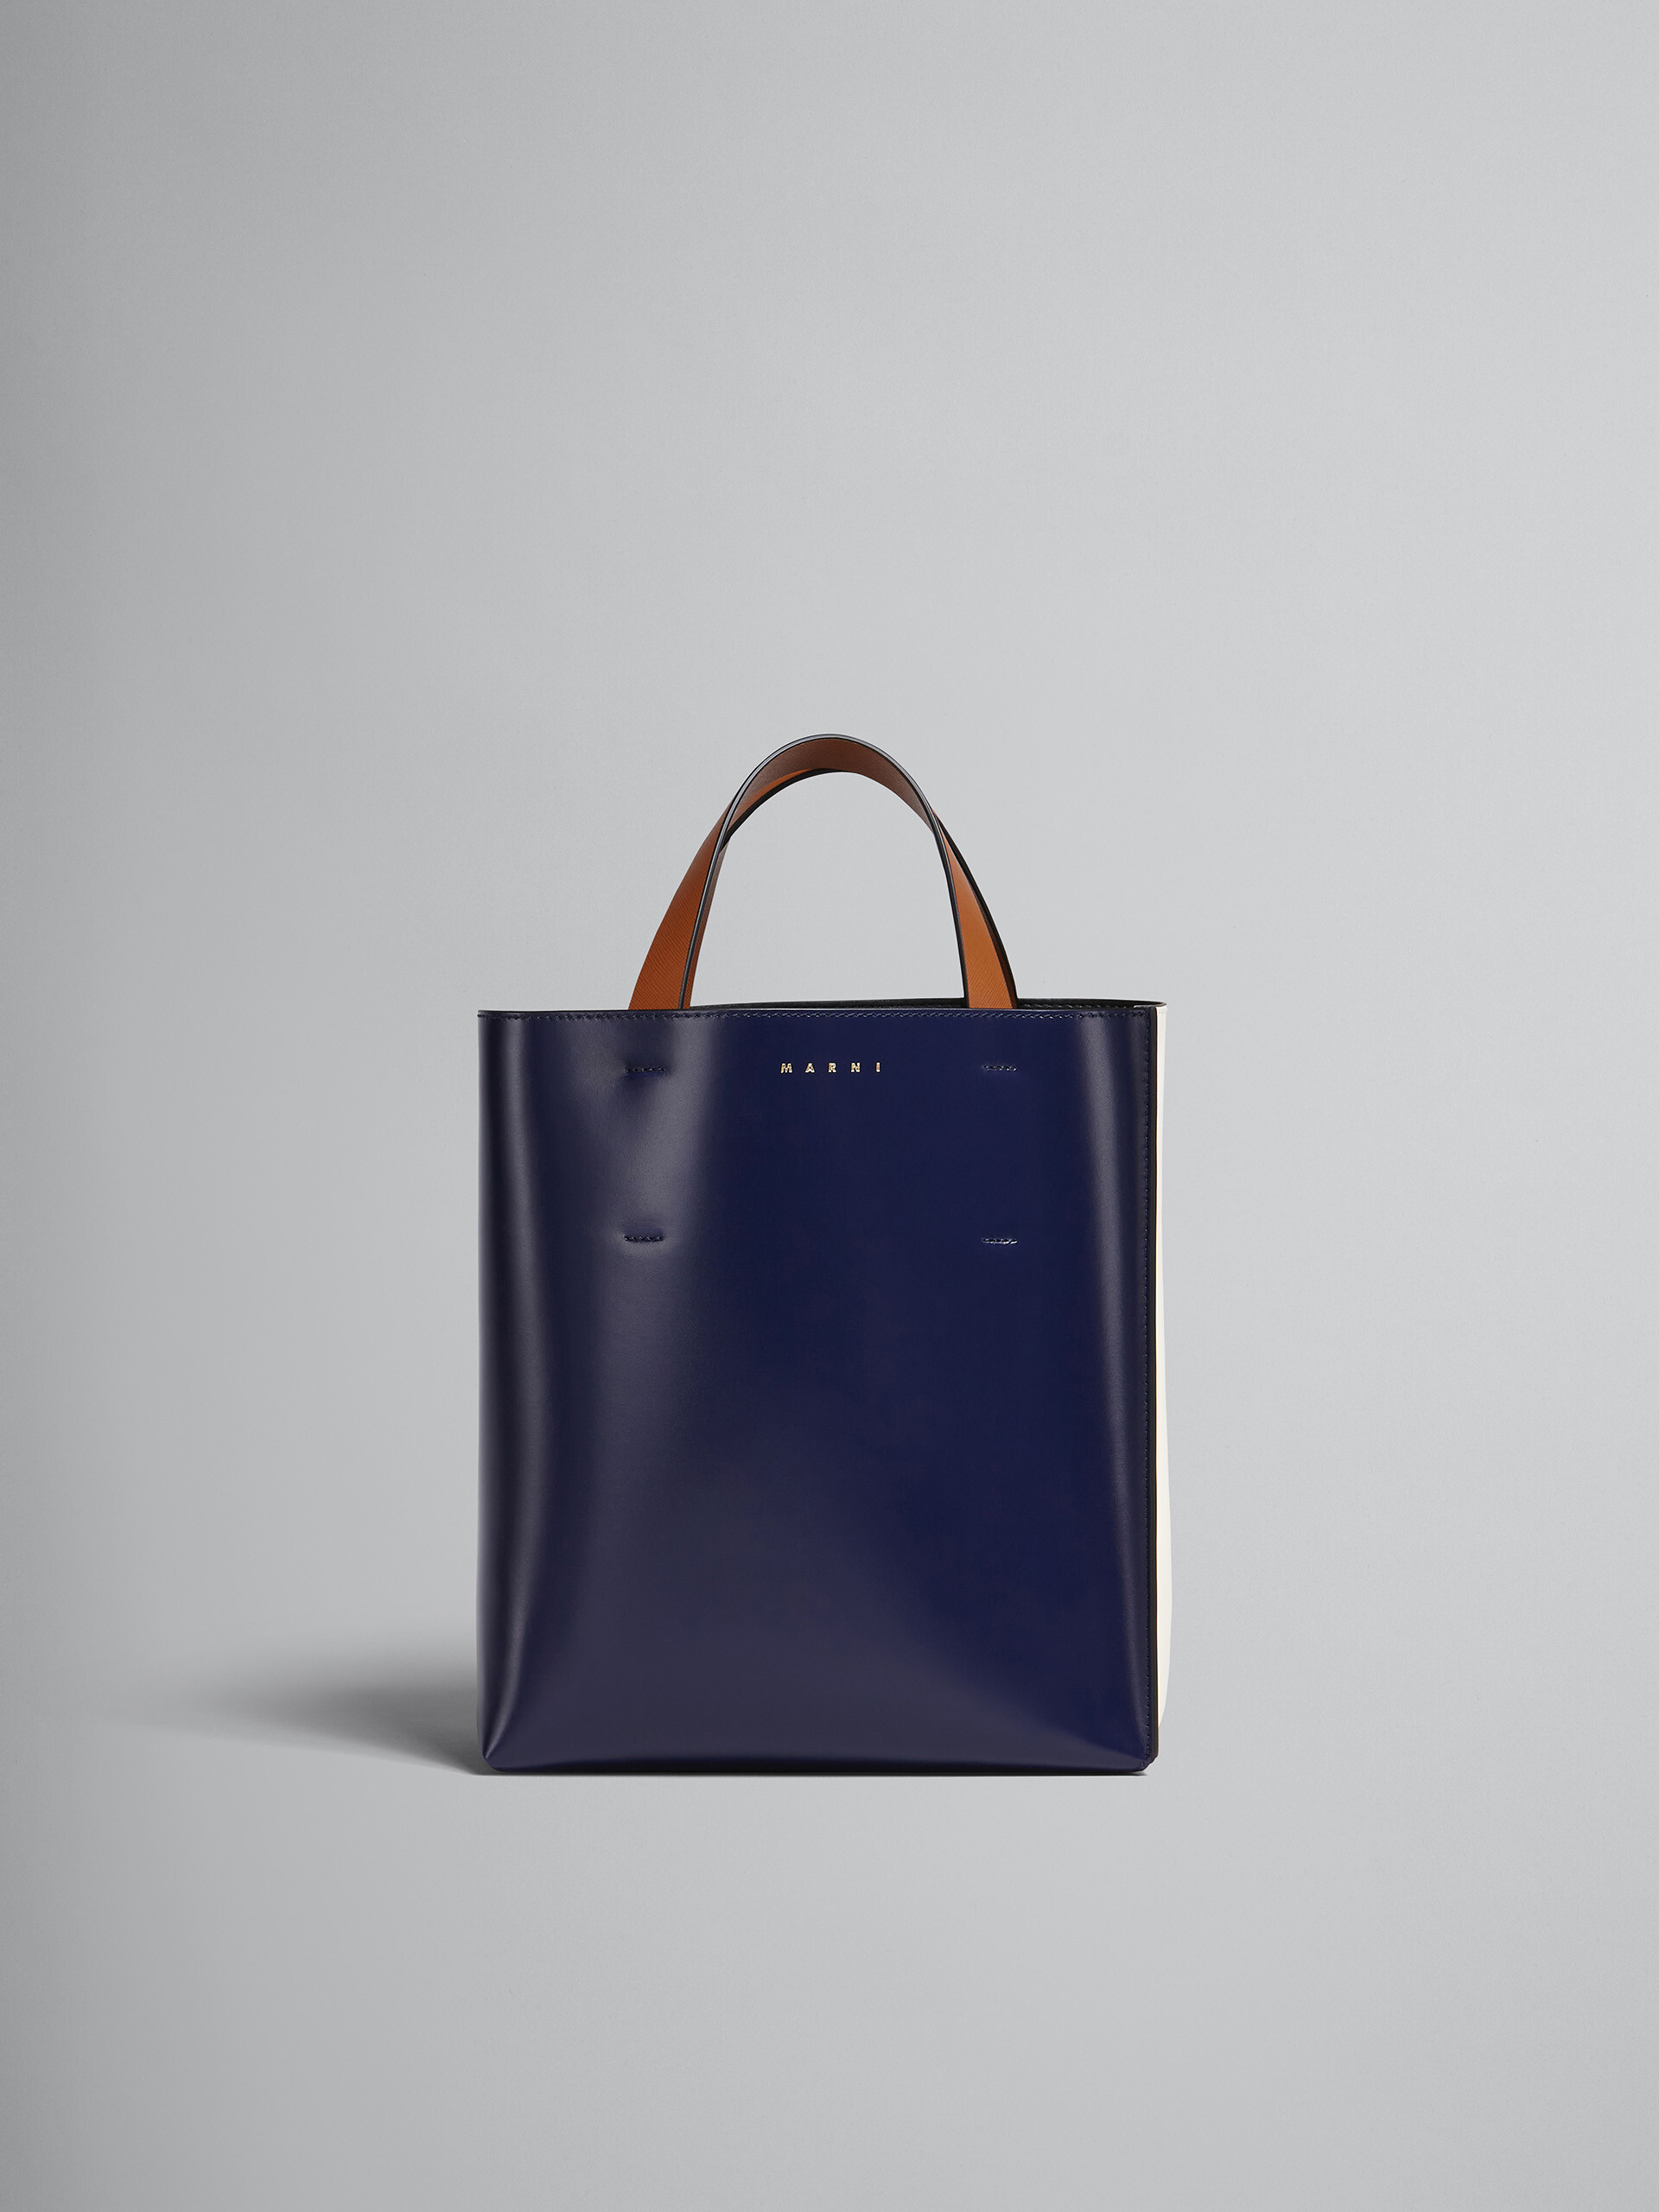 MUSEO small bag in blue and white leather | Marni